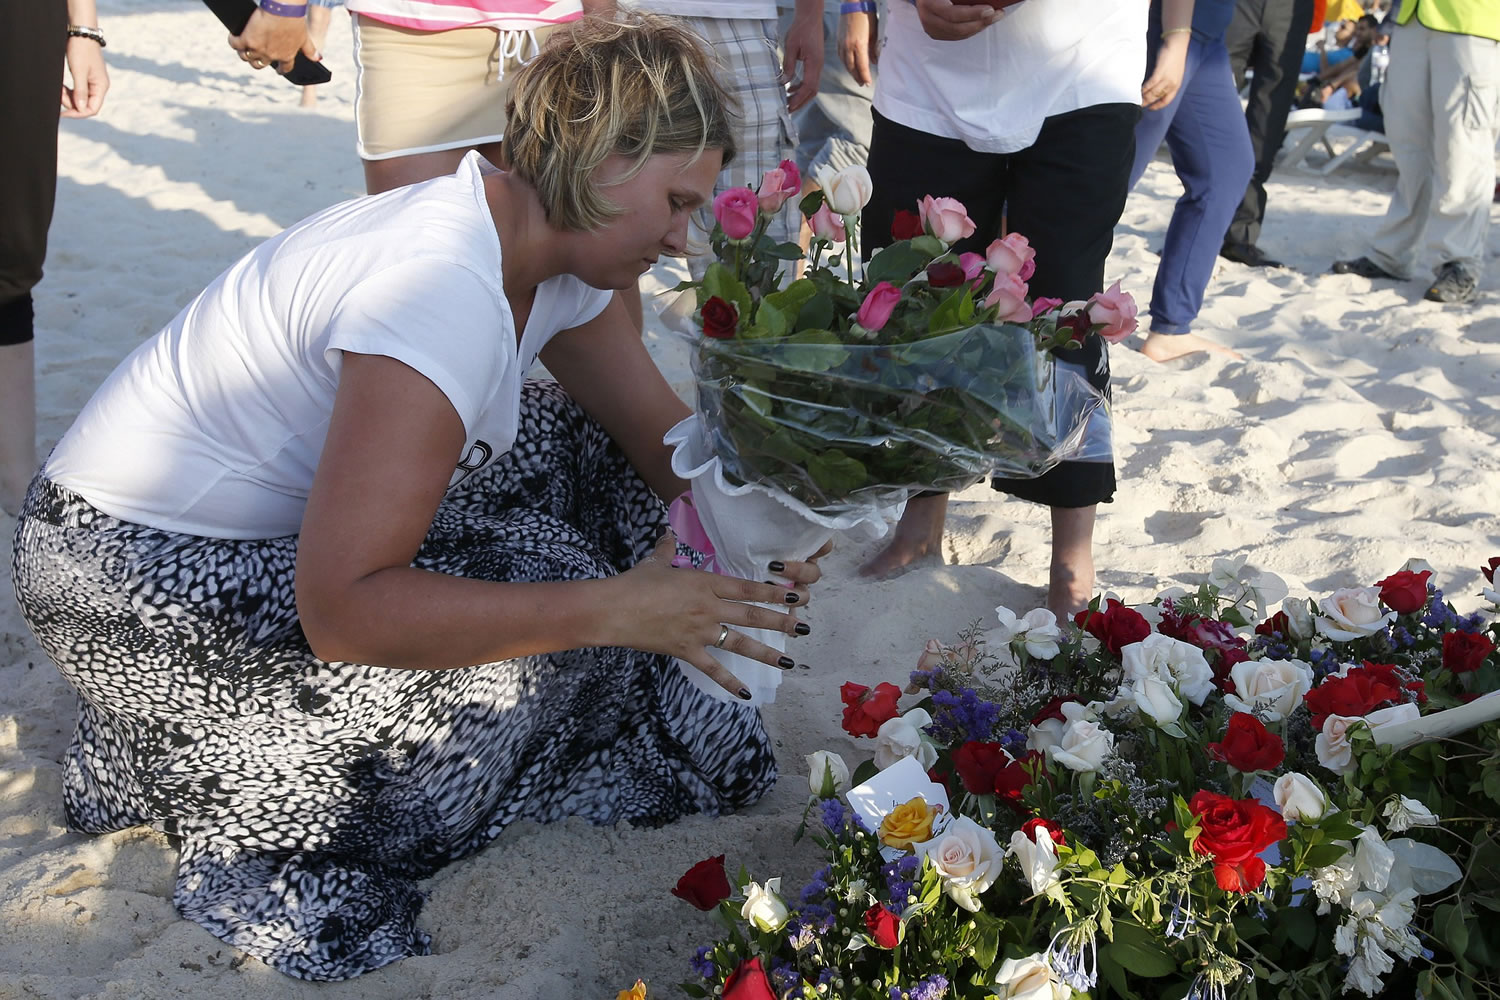 A tourist places flowers Sunday at the scene of Friday's shooting attack in the coastal town of Sousse, Tunisia.